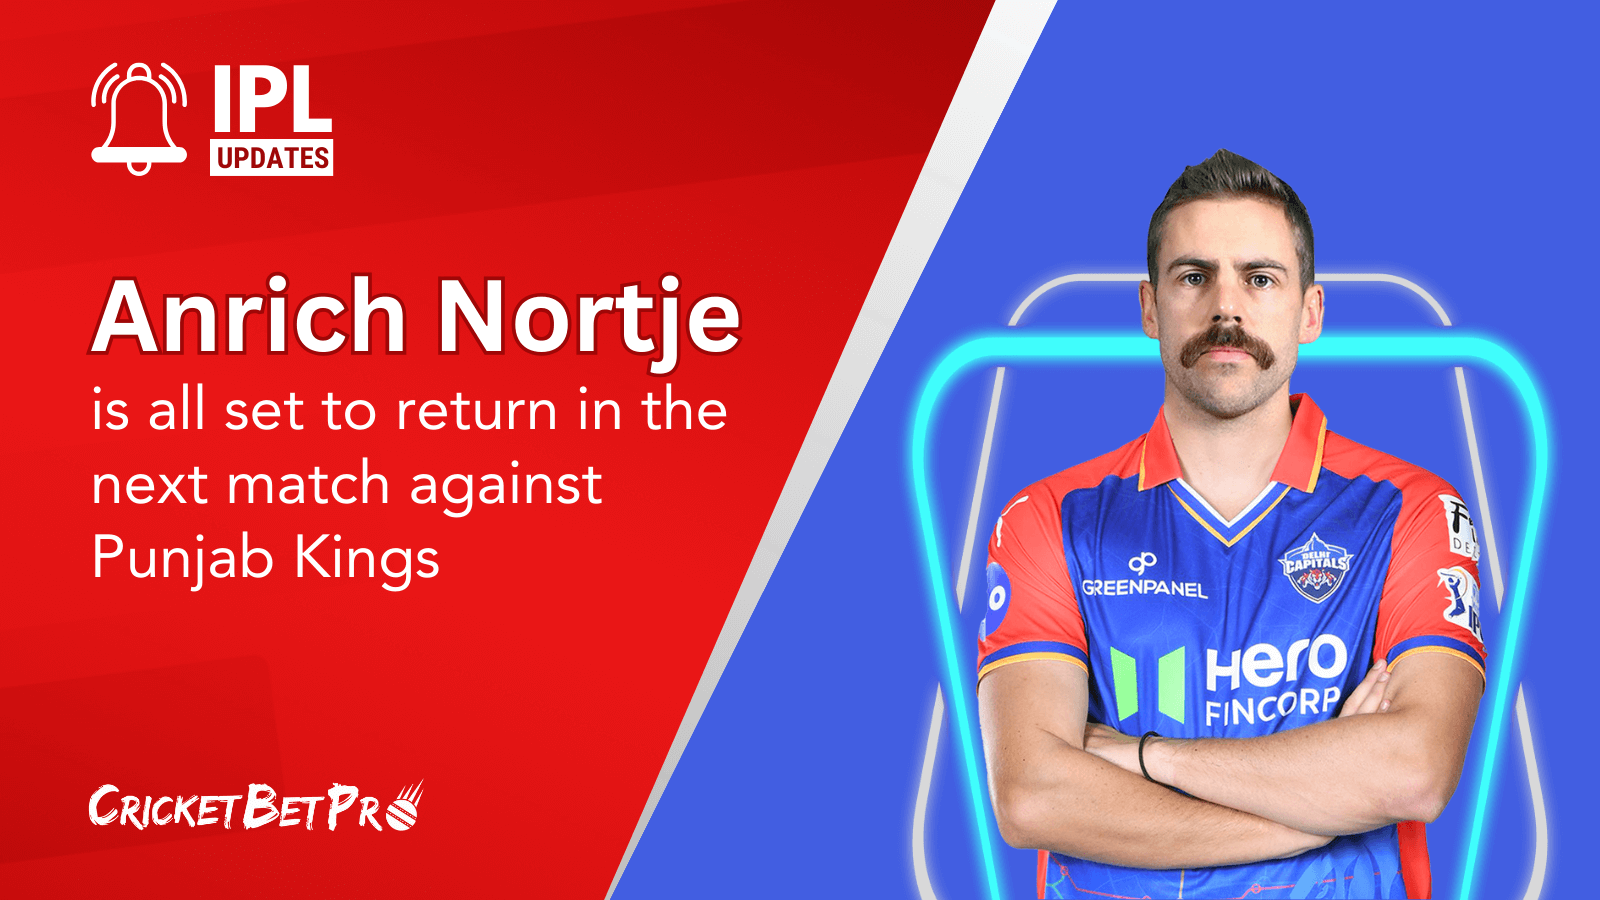 Anrich Nortje is all set to return in the next match against Punjab Kings